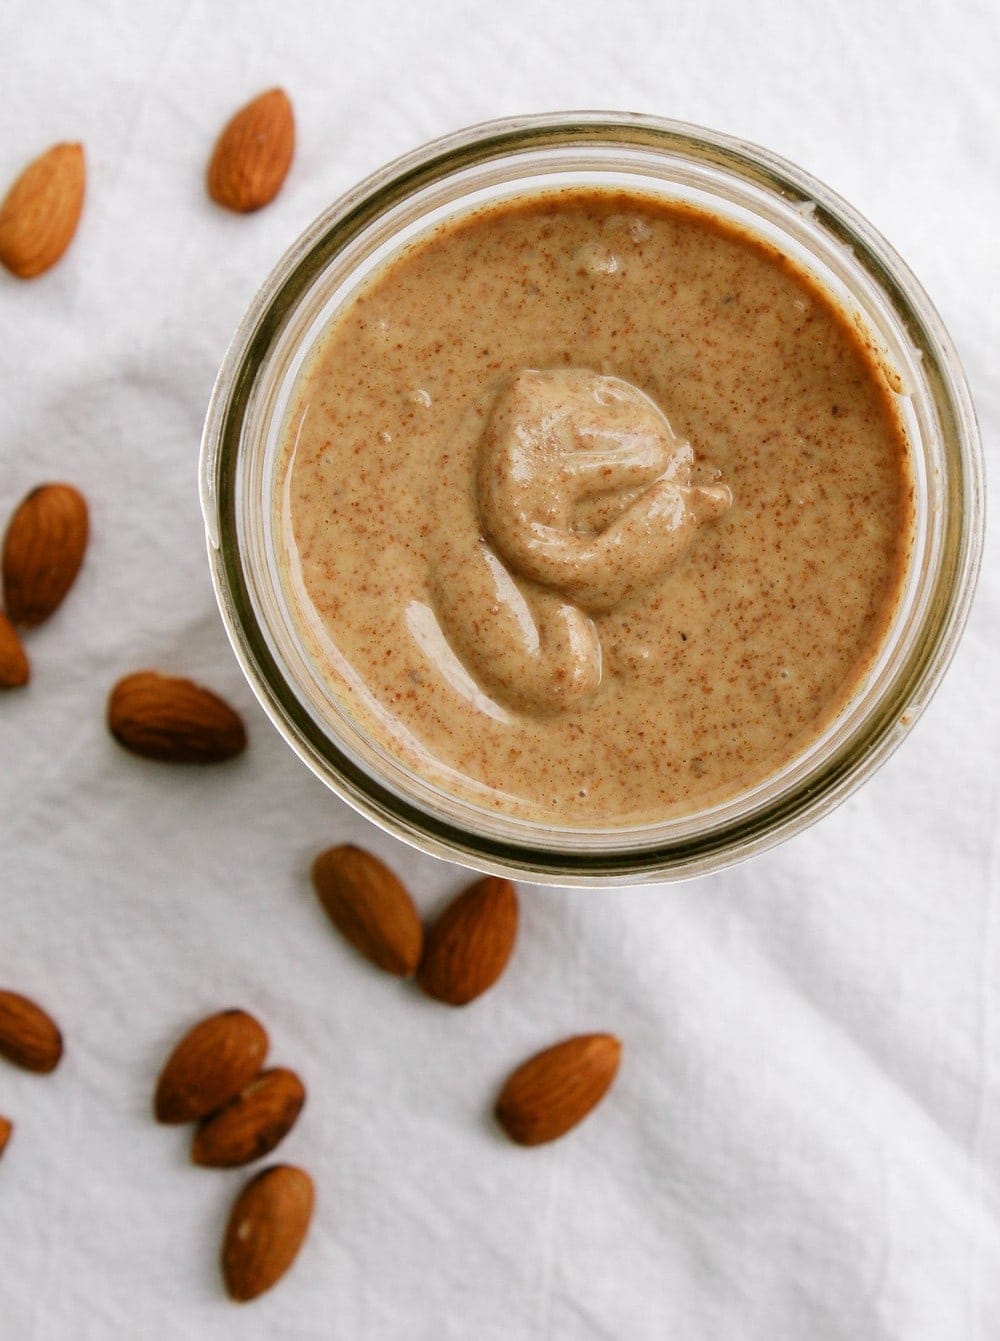 homemade almond butter in a glass jar on white tablecloth with almonds scattered around